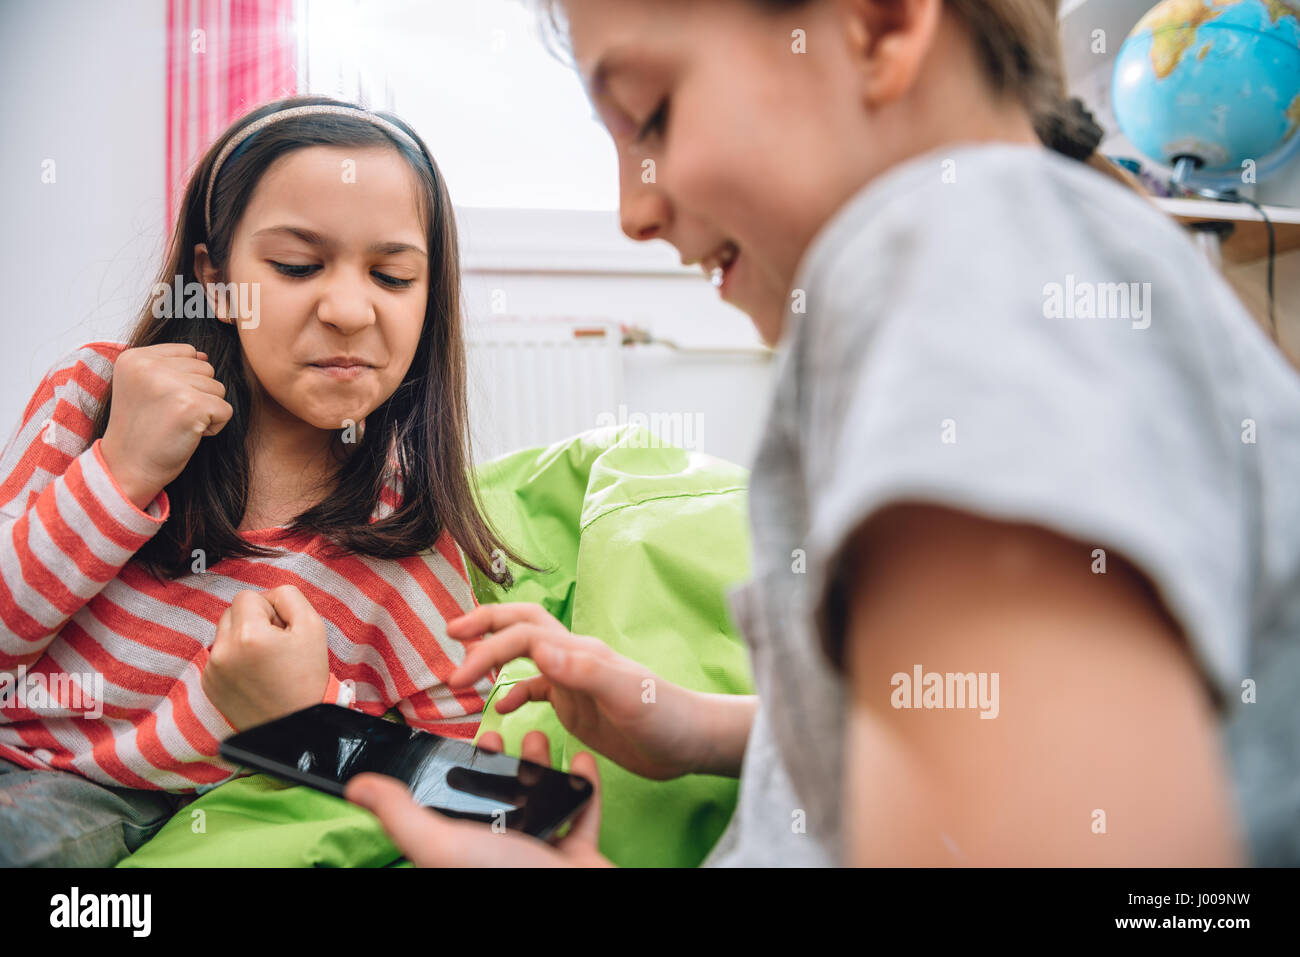 Two girls sitting in the kids room and using smart phone Stock Photo